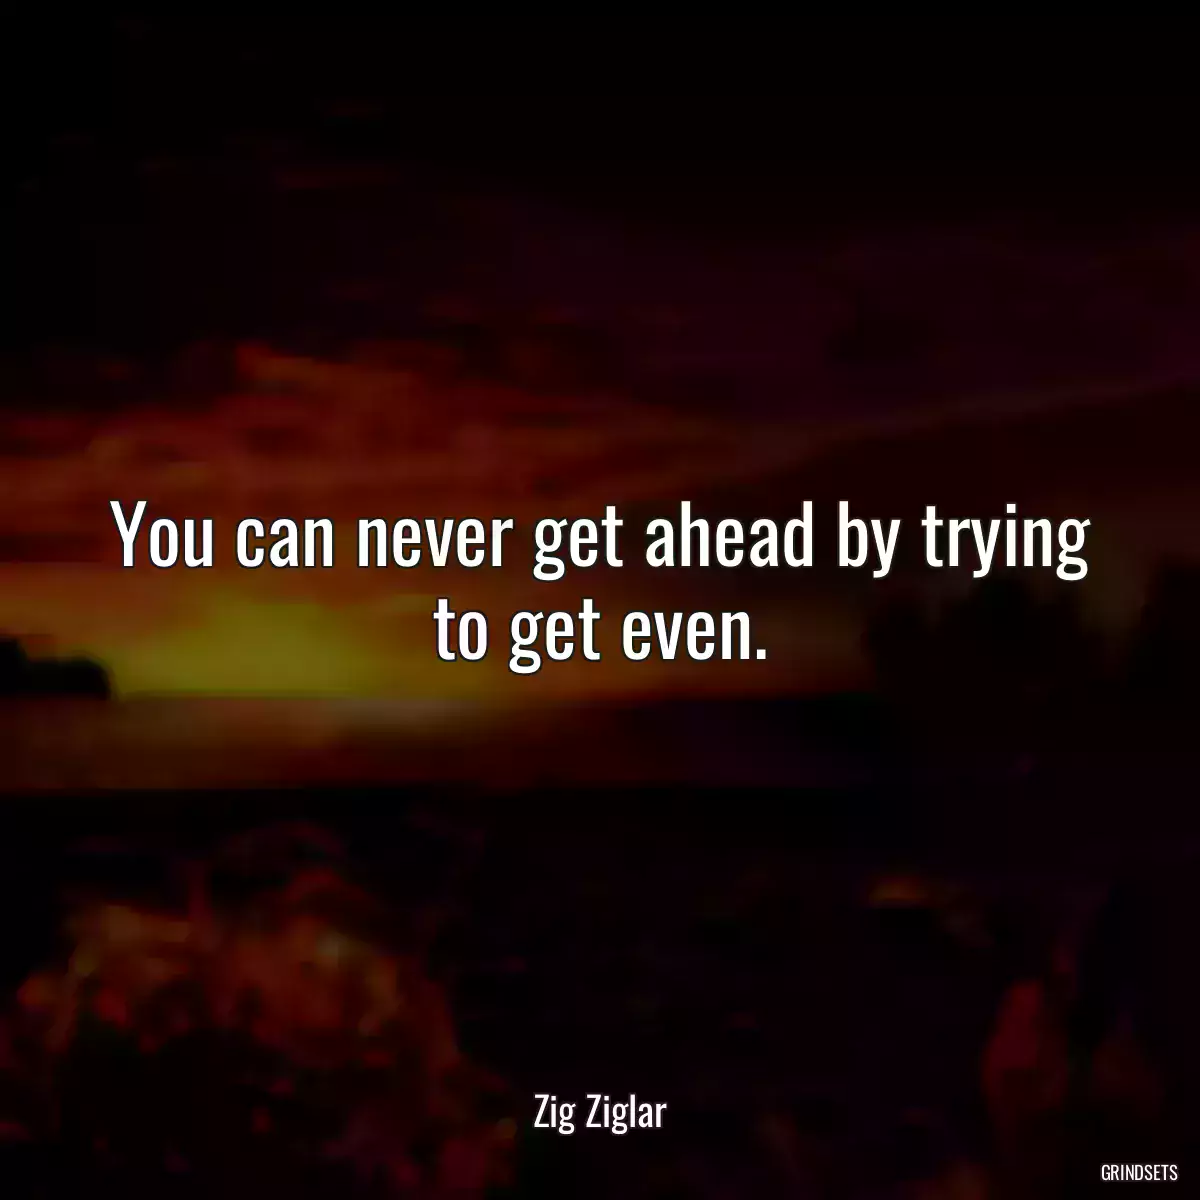 You can never get ahead by trying to get even.